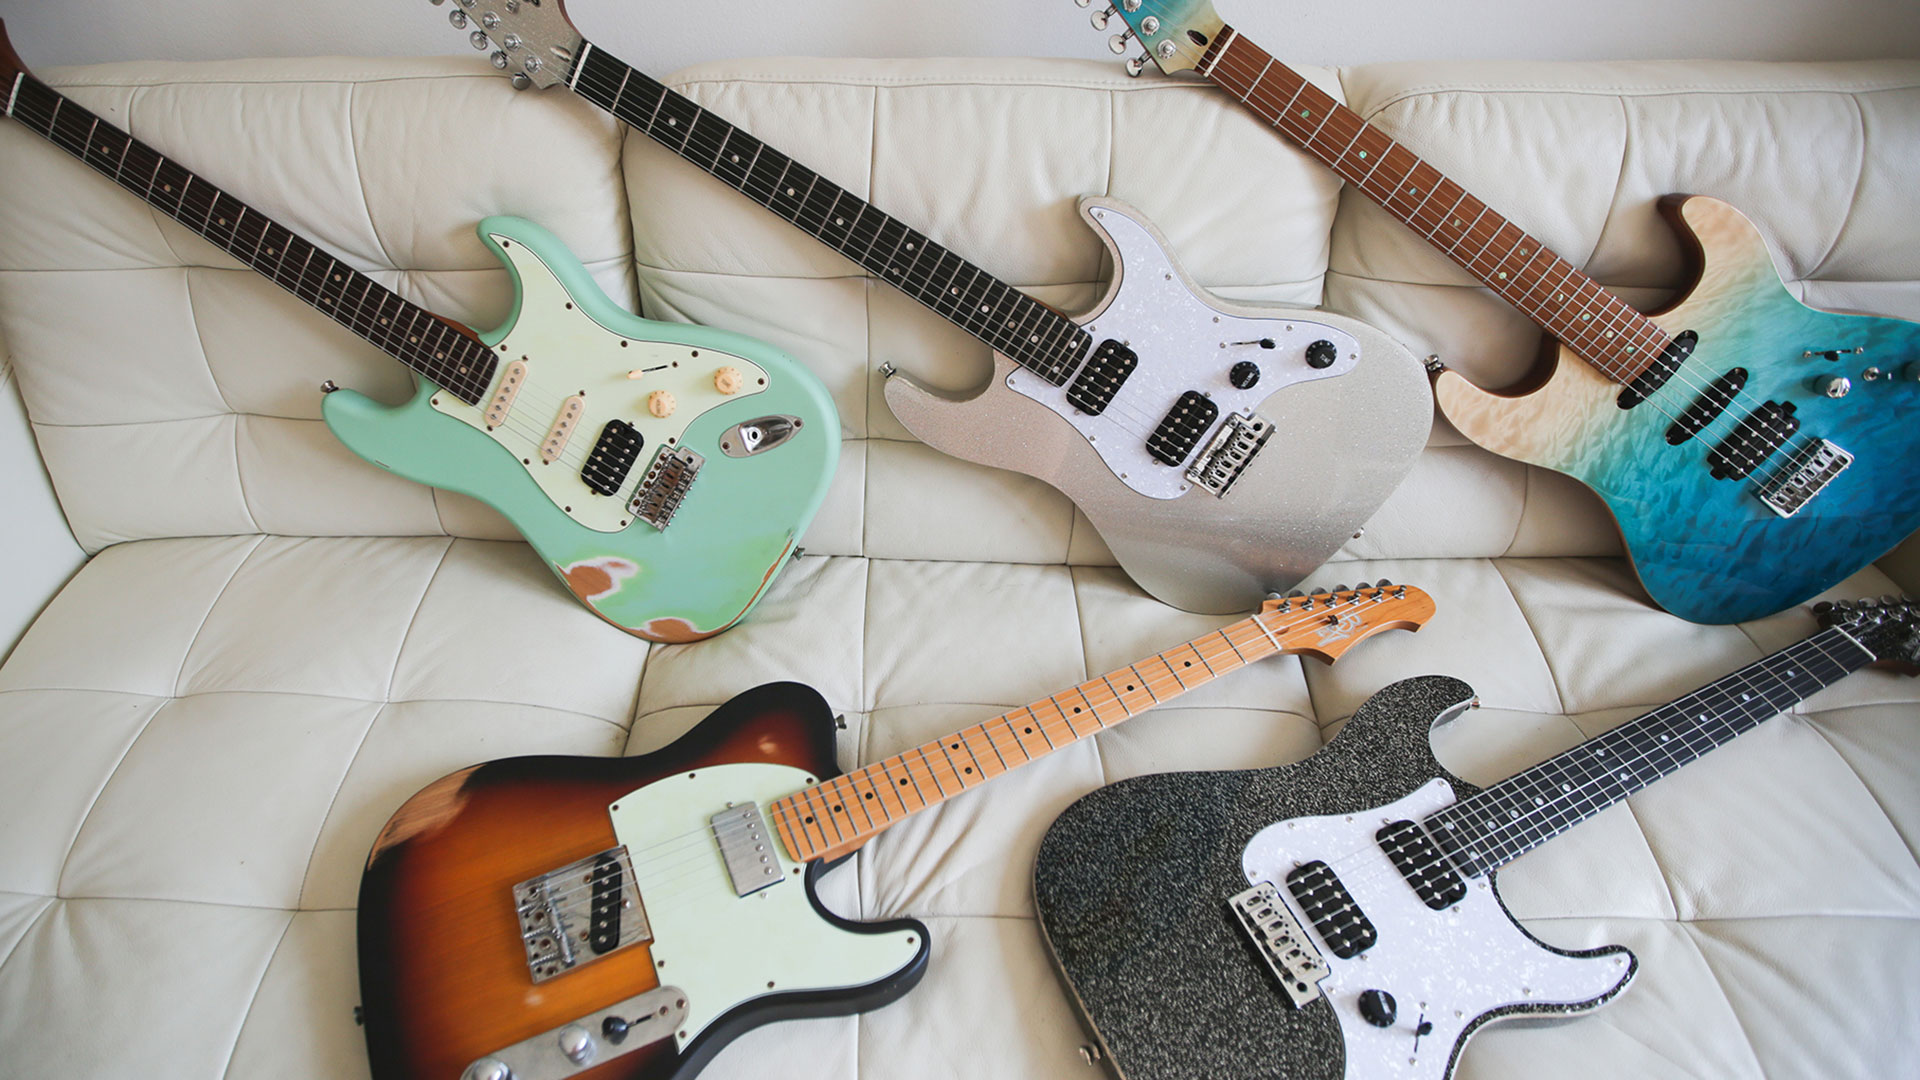 The neck of your dreams and a price to match – find out why the guitar scene’s budget hawks are raving about JET Guitars